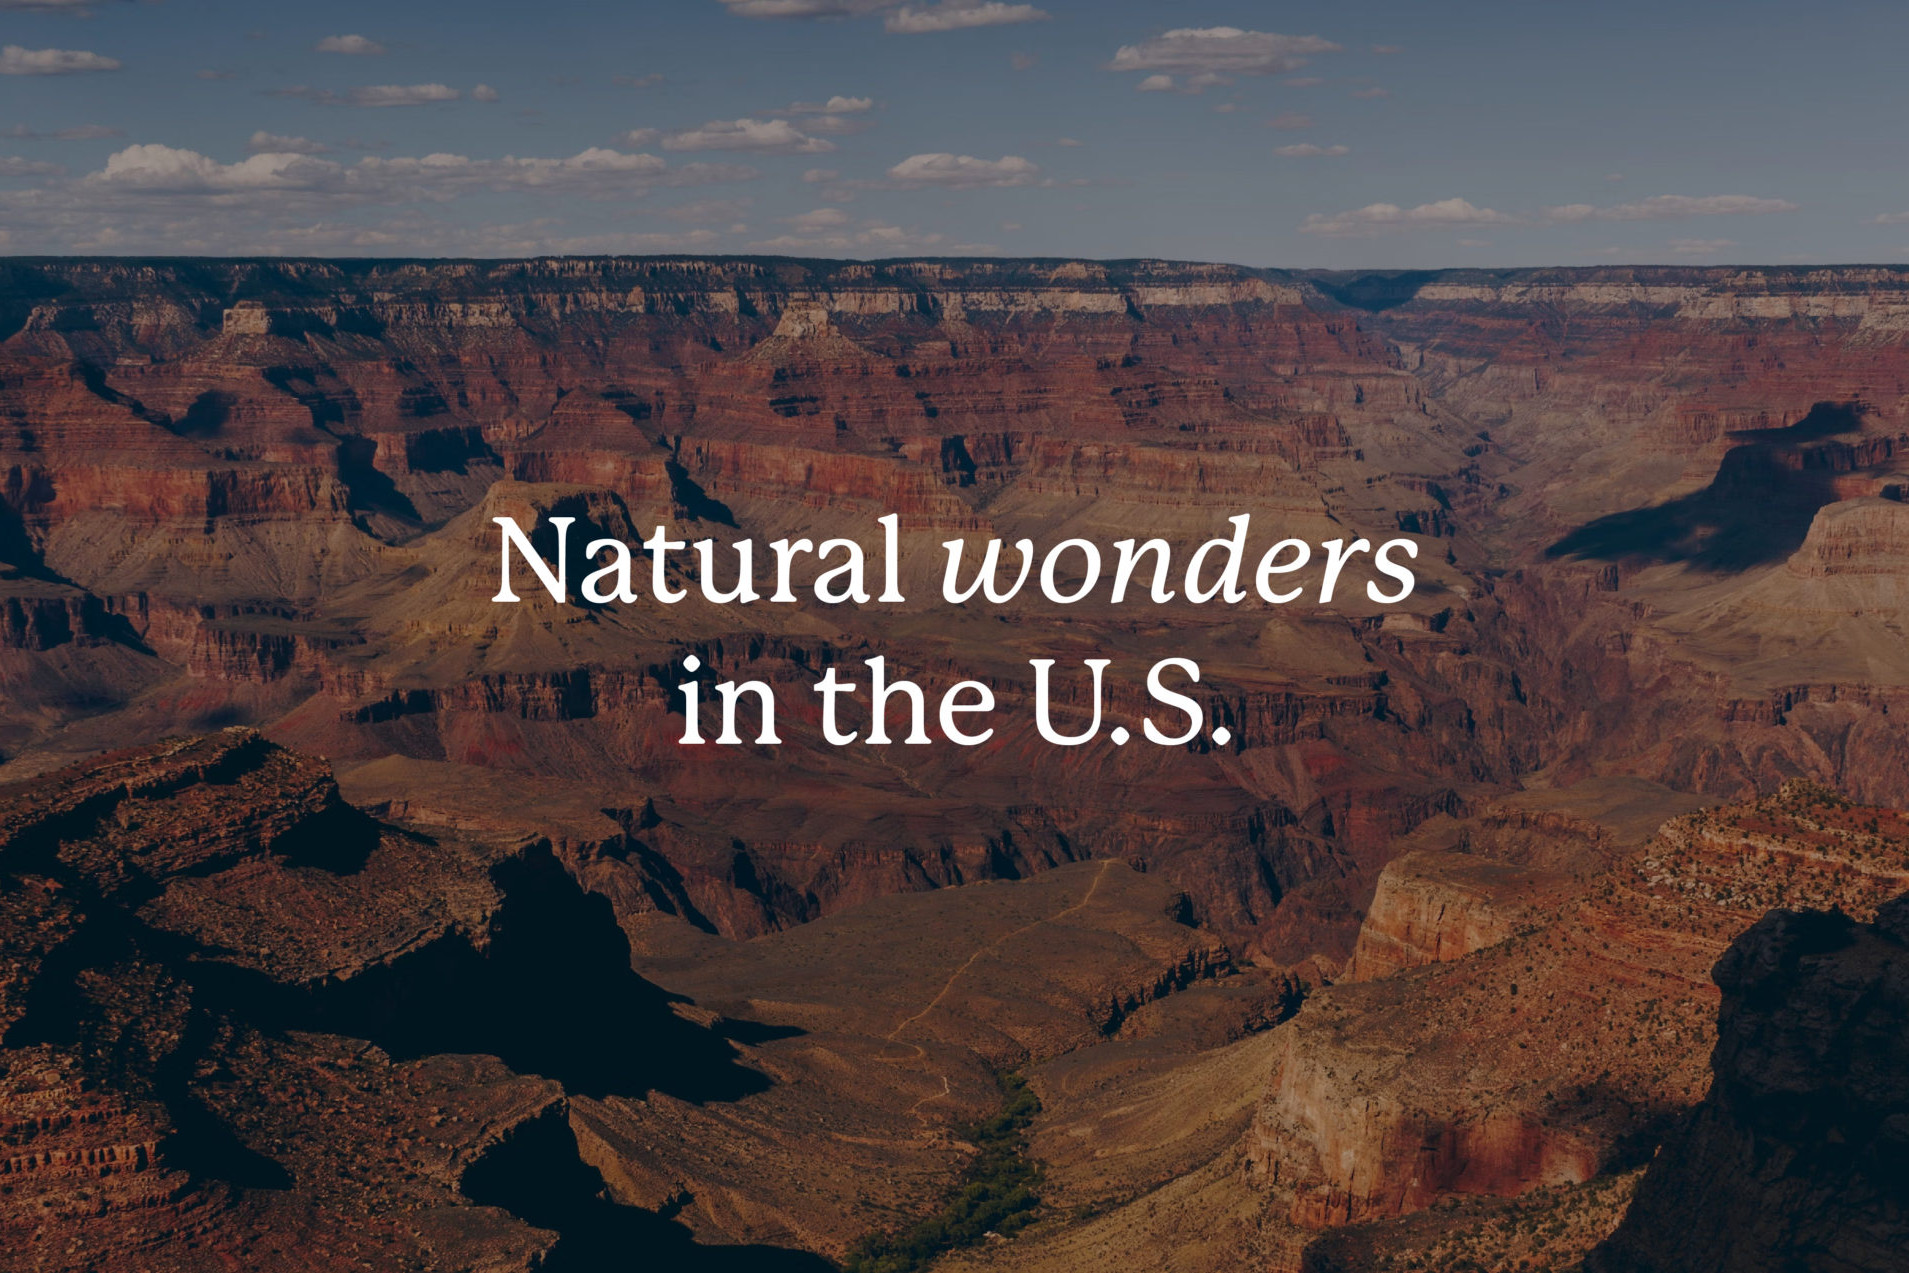 Natural wonders in the United States